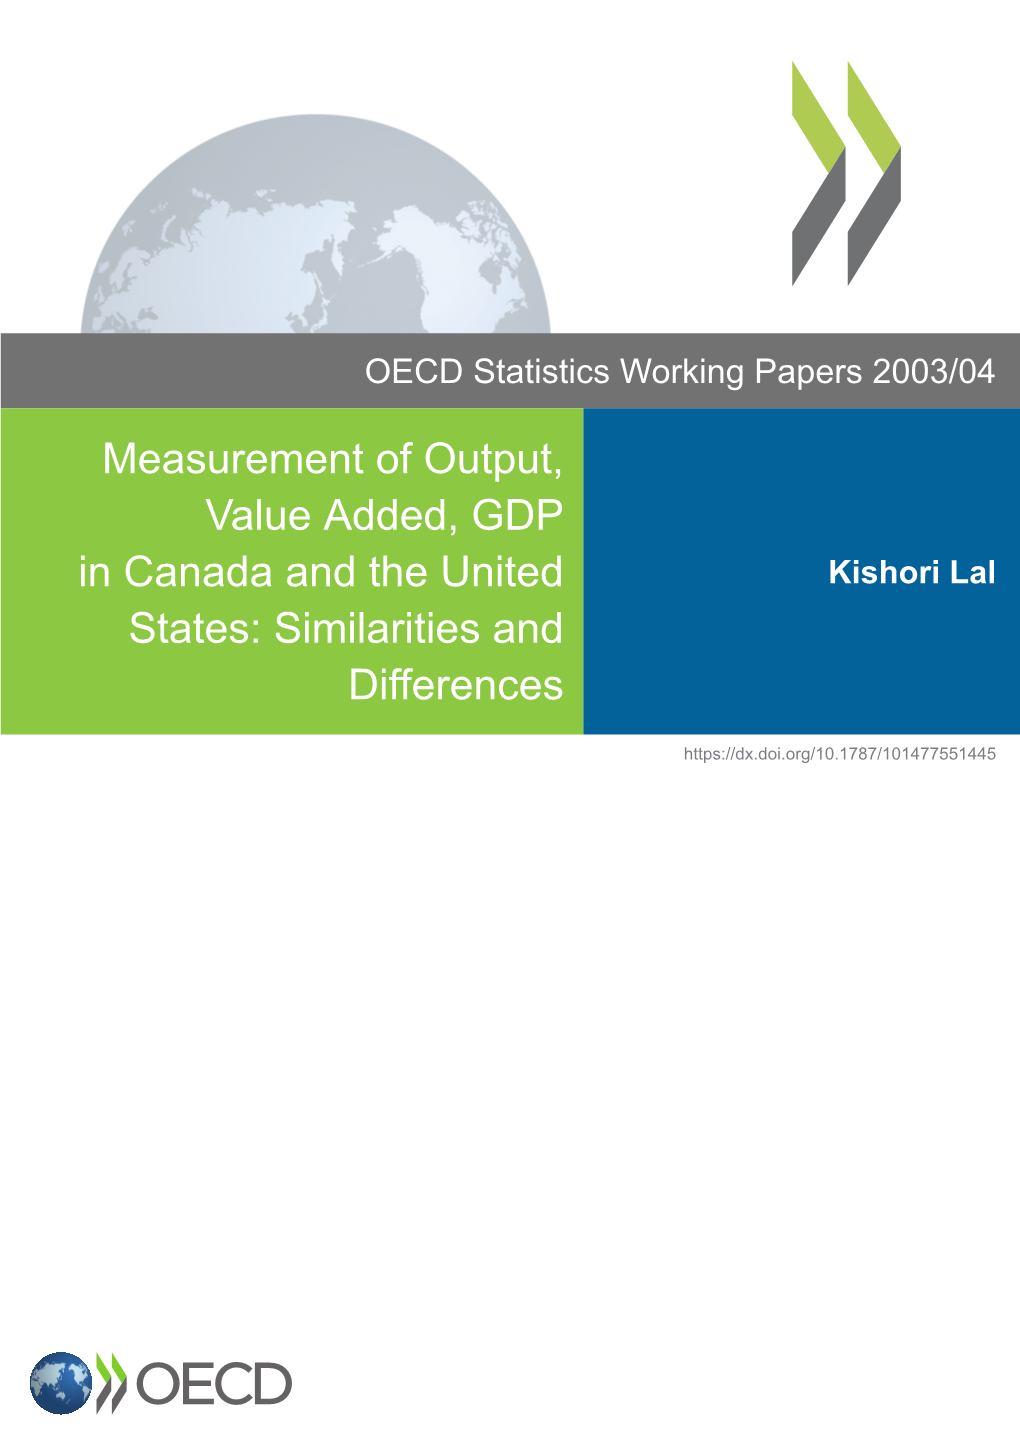 Measurement of Output, Value Added, Gdp in Canada and the United States: Similarities and Differences